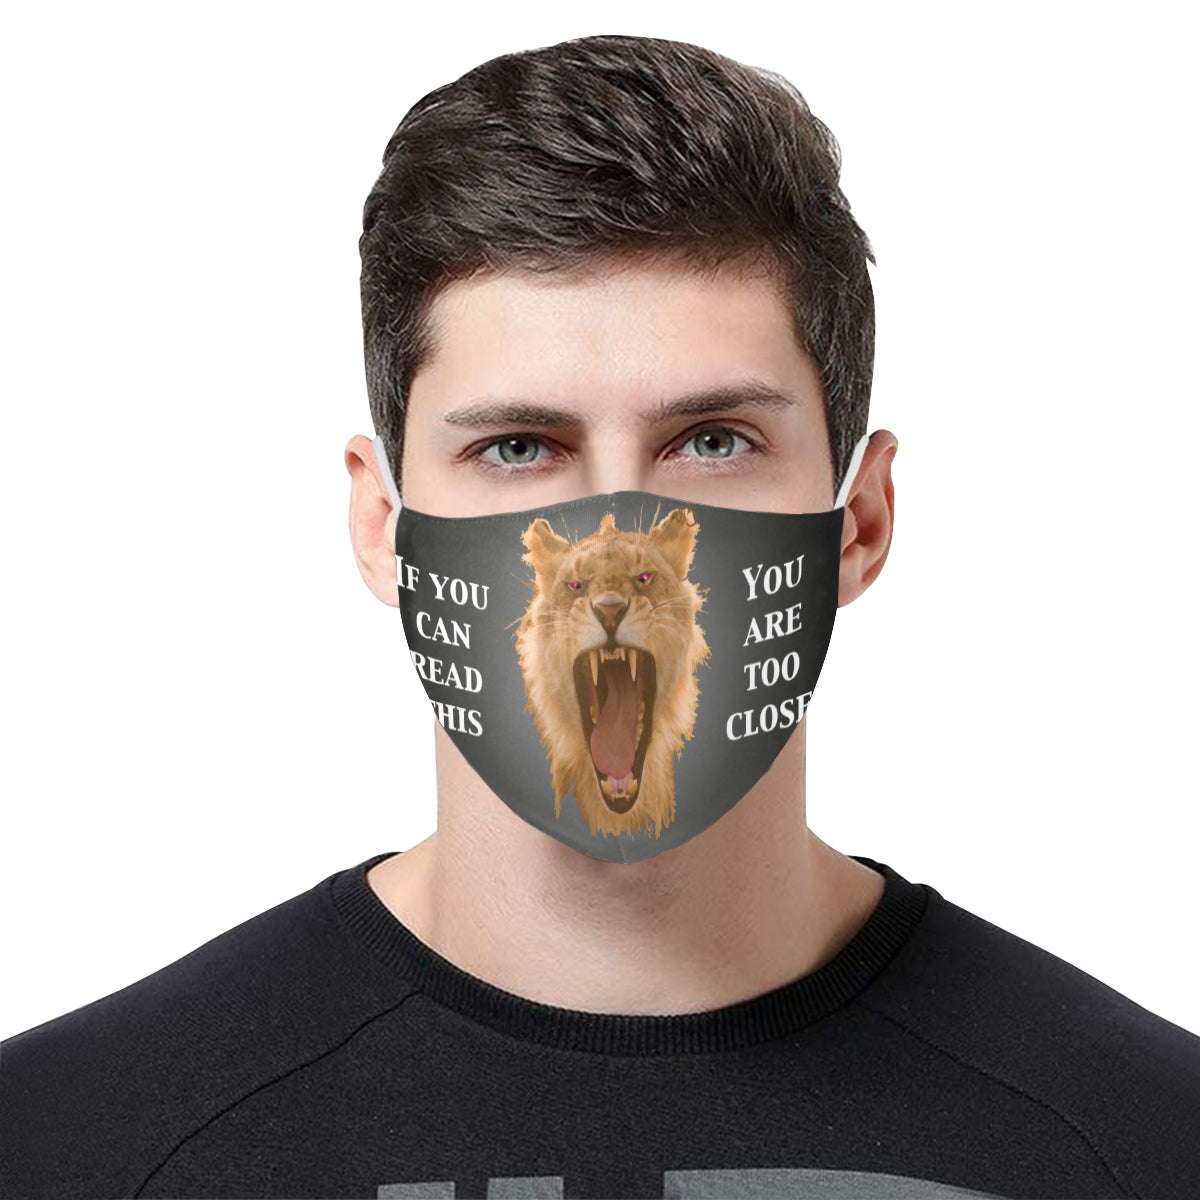 You are too close, Roar! Cotton Fabric Face Mask with Filter Slot & Adjustable Strap (Pack of 5) - Non-medical use